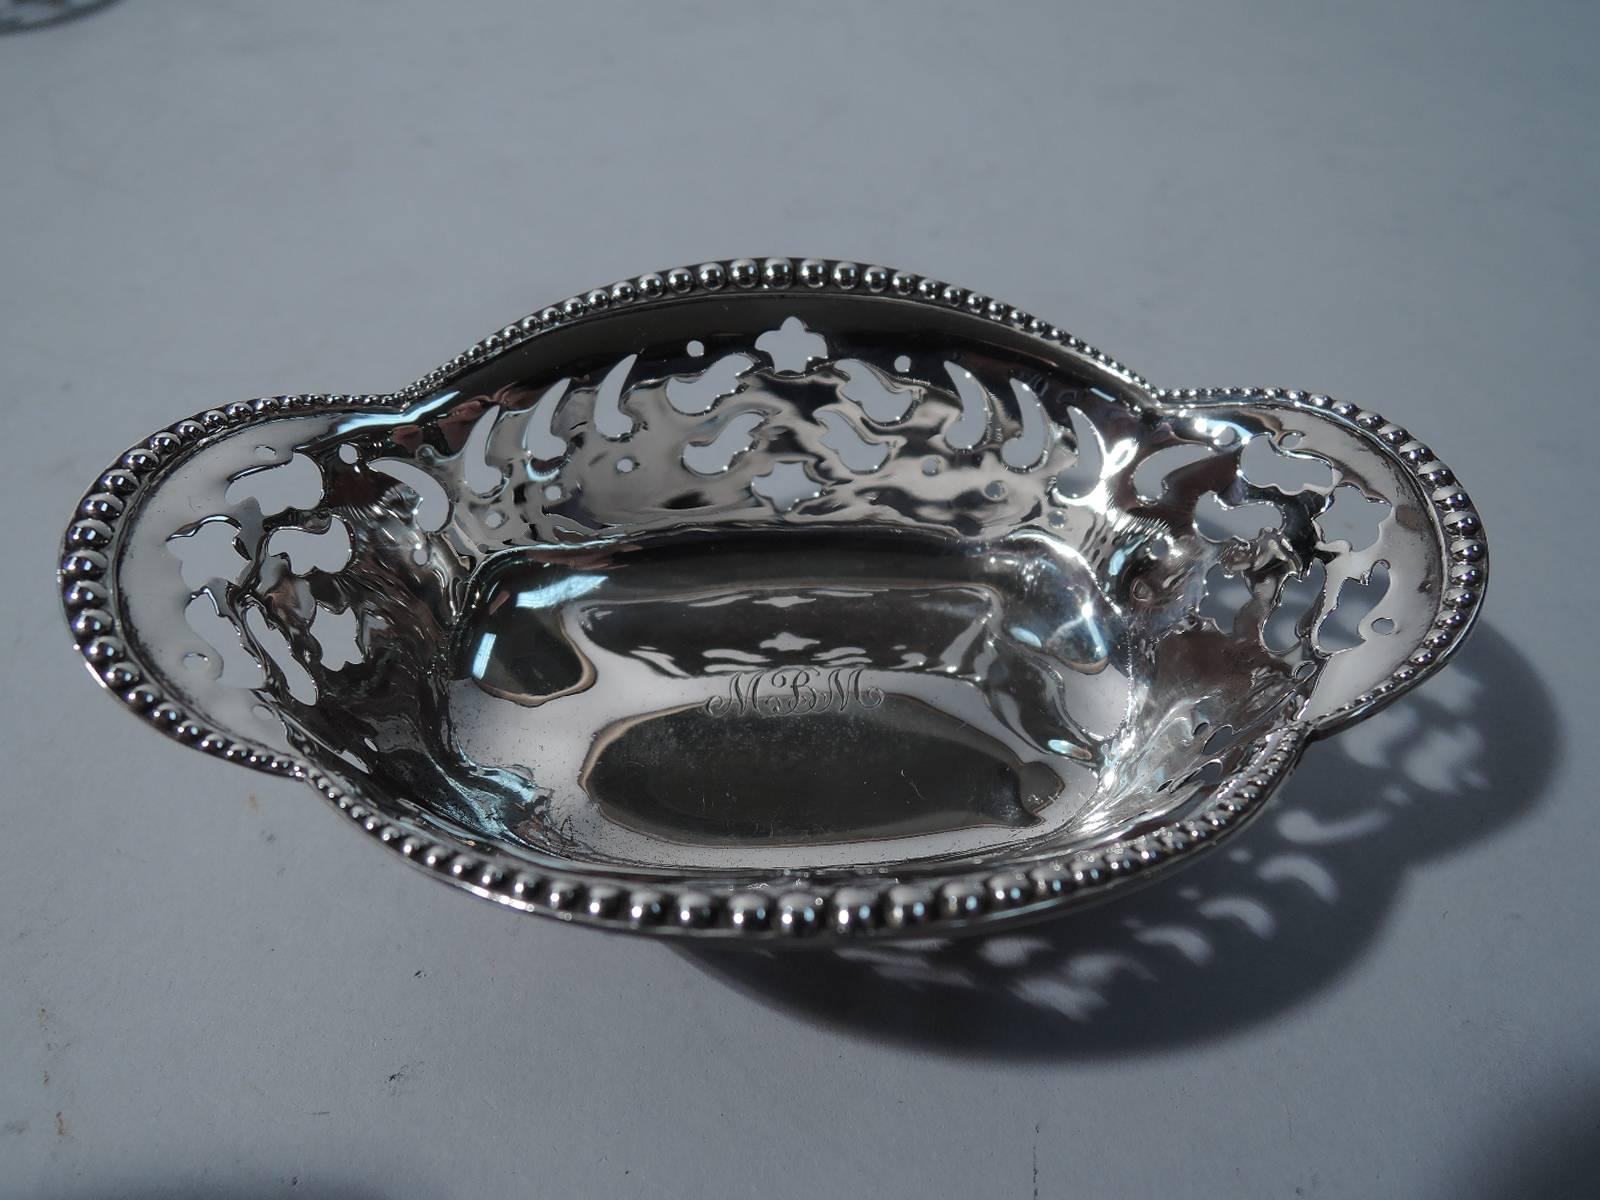 Set of 12 sterling silver nut dishes. Made by Tiffany & Co. in New York, circa 1898. Each: quatrefoil with flared and beaded rim, and pierced sides. Rests on four ball supports. Script monogram engraved to well. The pattern (no. 13732) was first